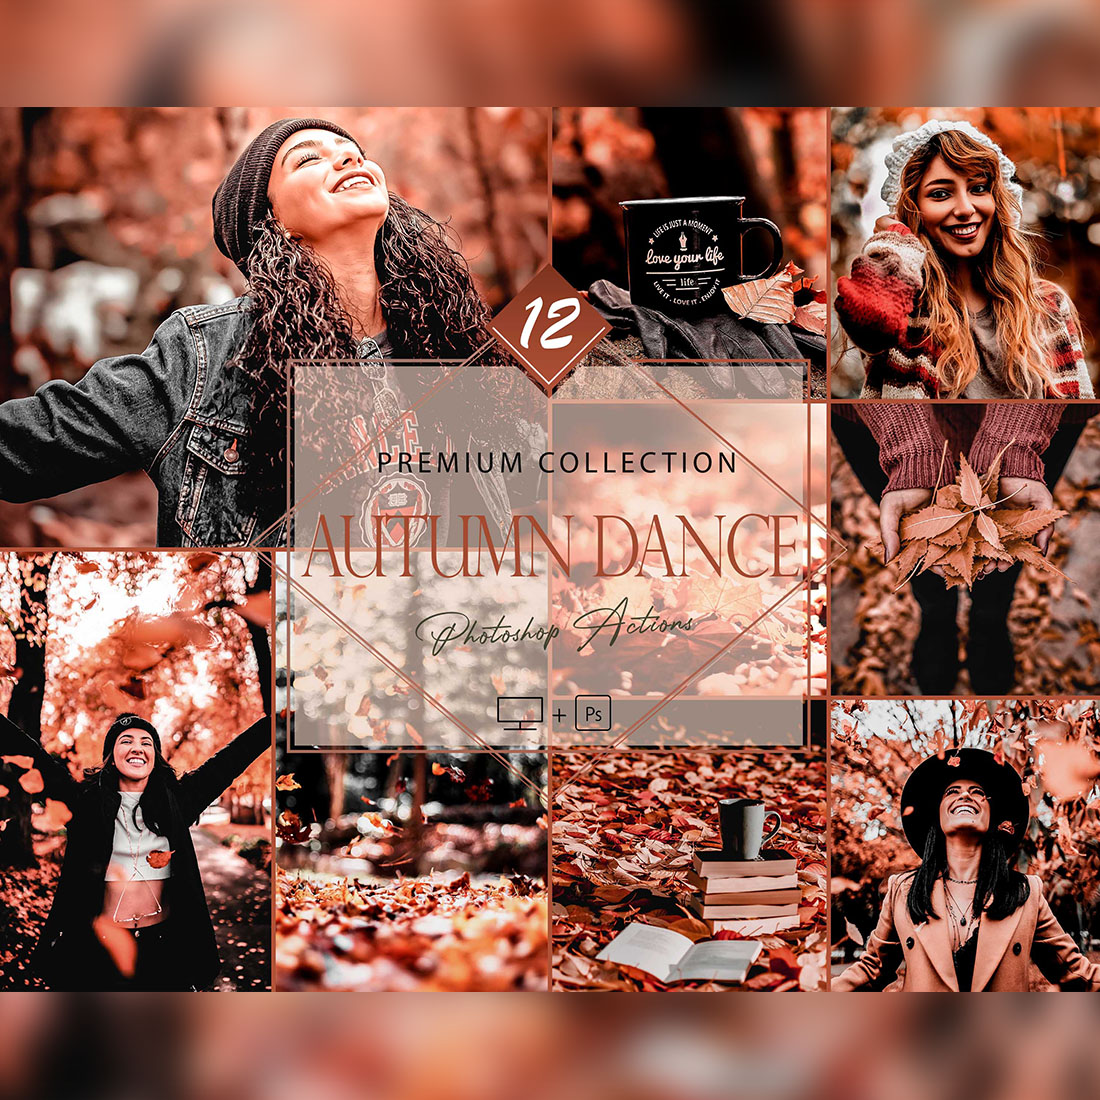 12 Photoshop Actions, Autumn Dance Ps Action, Orange ACR Preset, Saturation Filter, Lifestyle Theme For Instagram, Fall Blogger Instagram , Top Theme cover image.